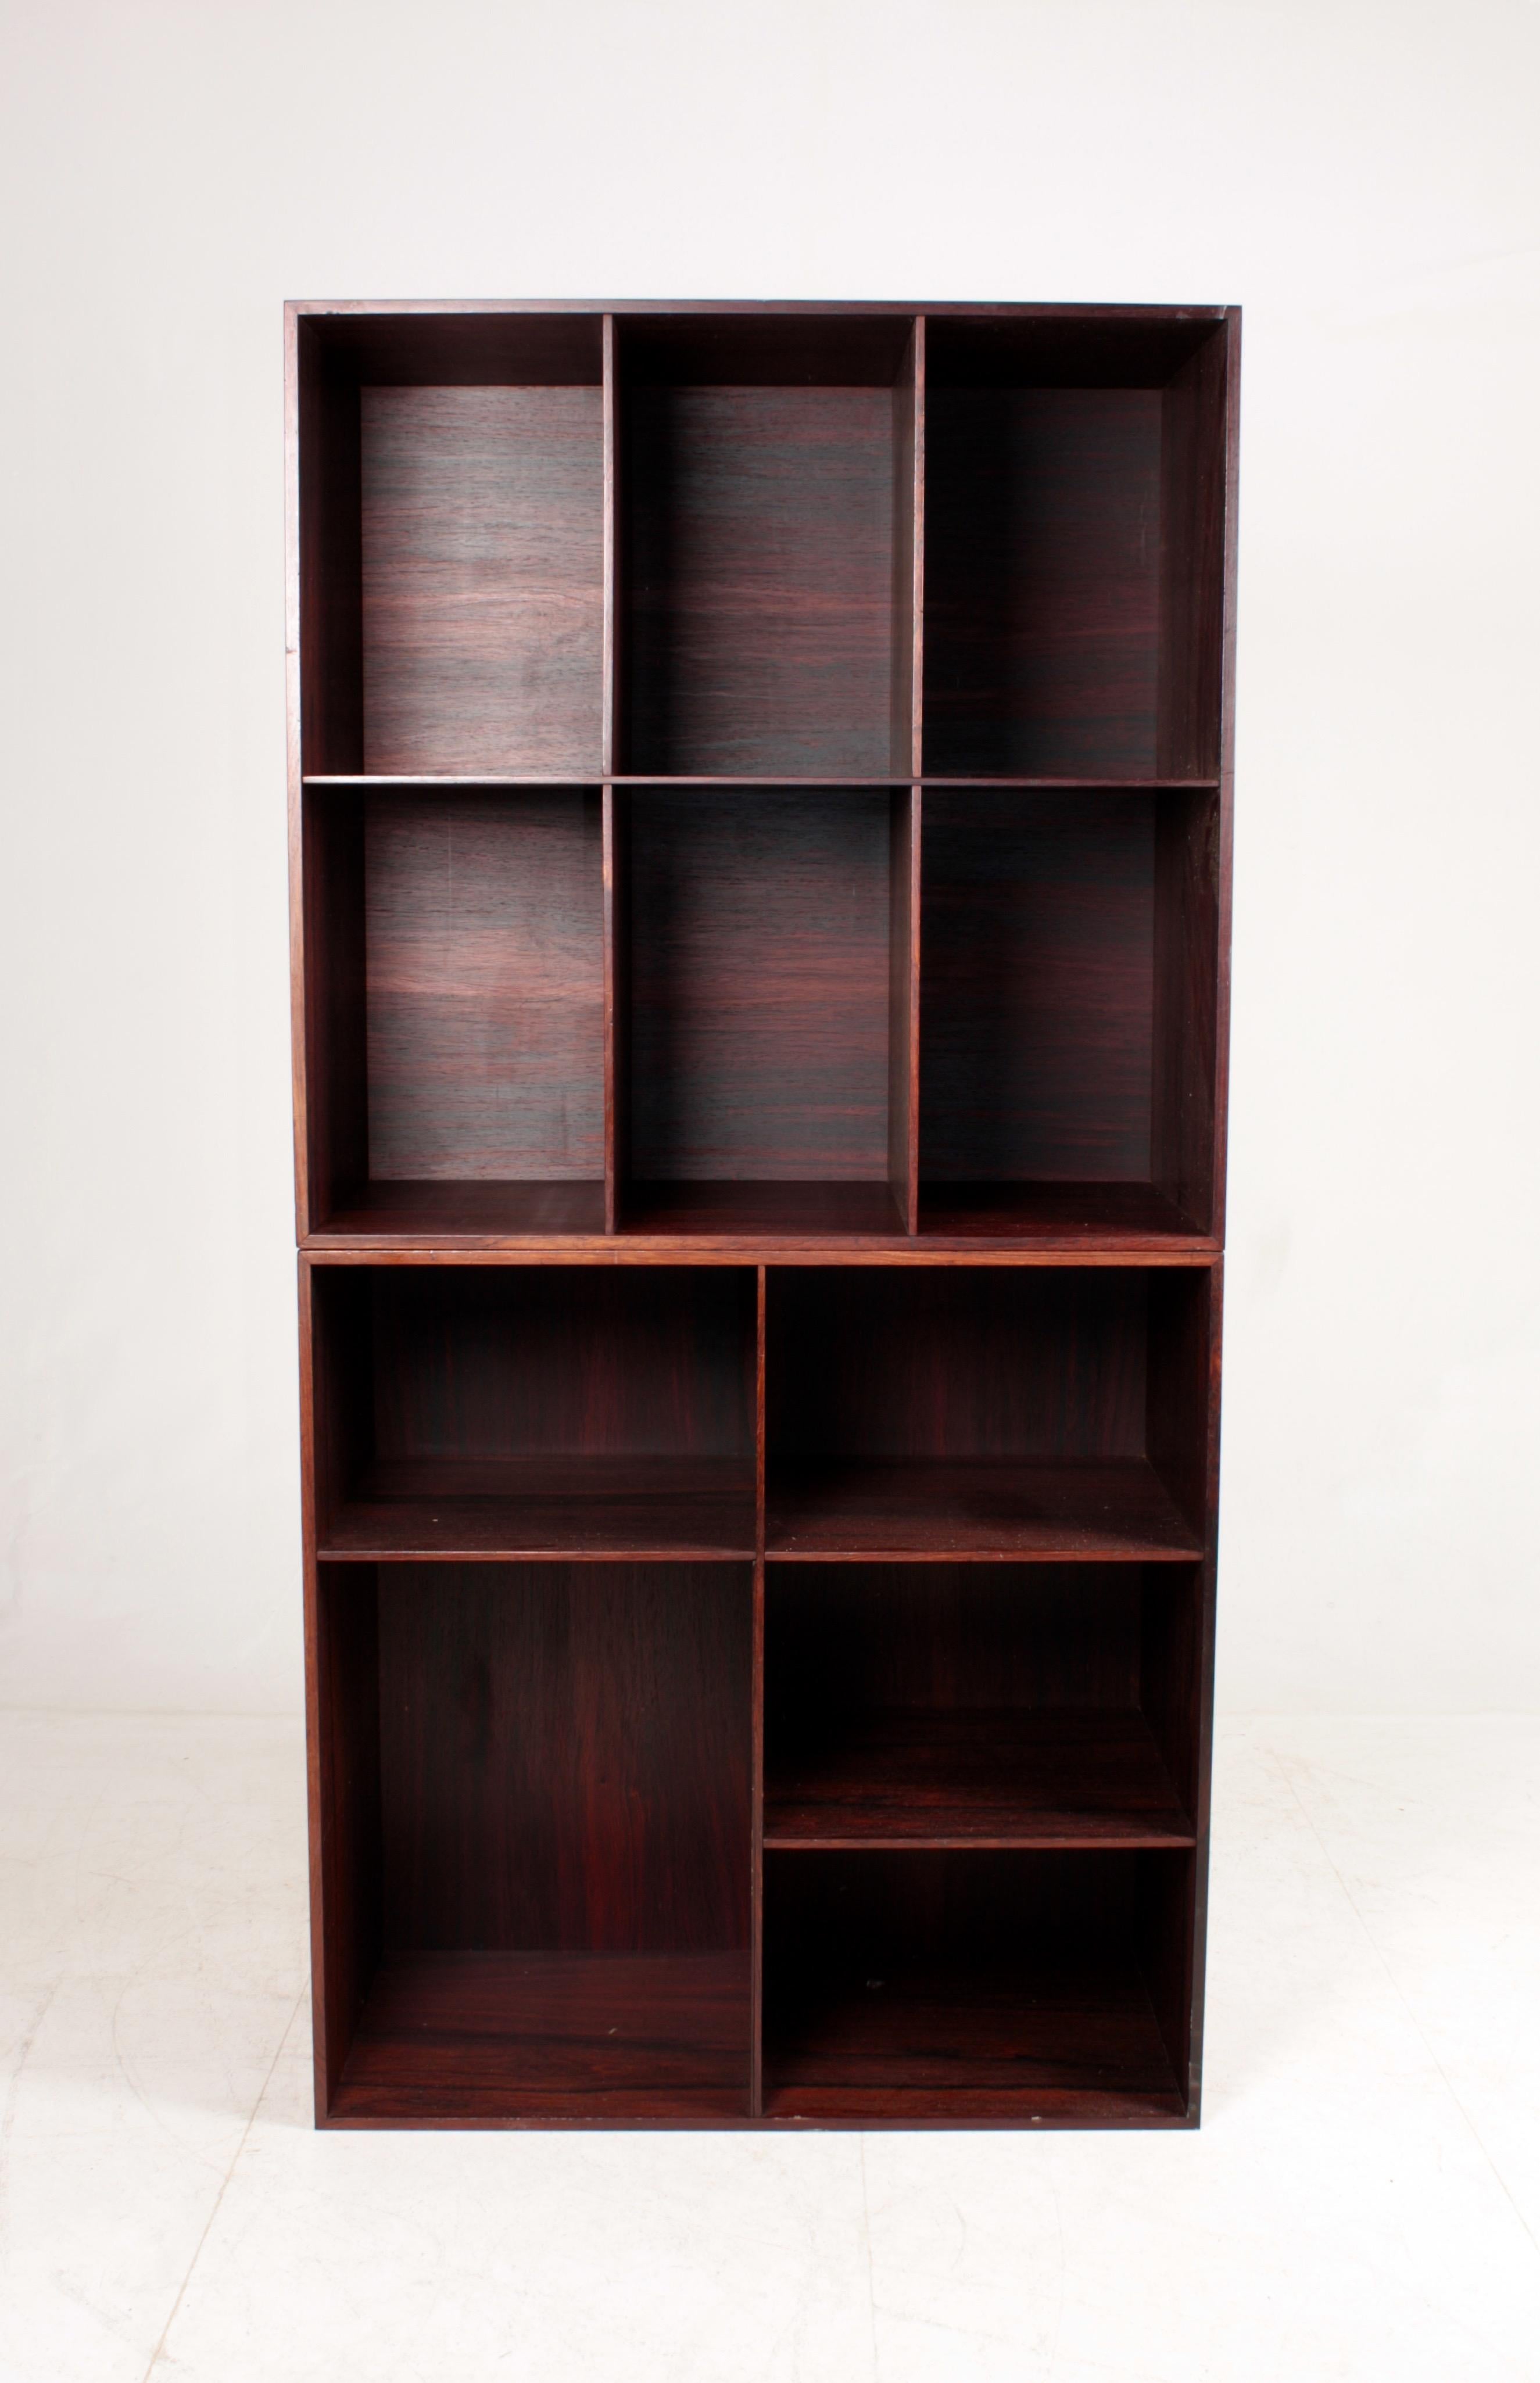 Pair of Bookcases in Rosewood by Mogens Koch, Danish Design, Mid-Century, 1950s For Sale 1